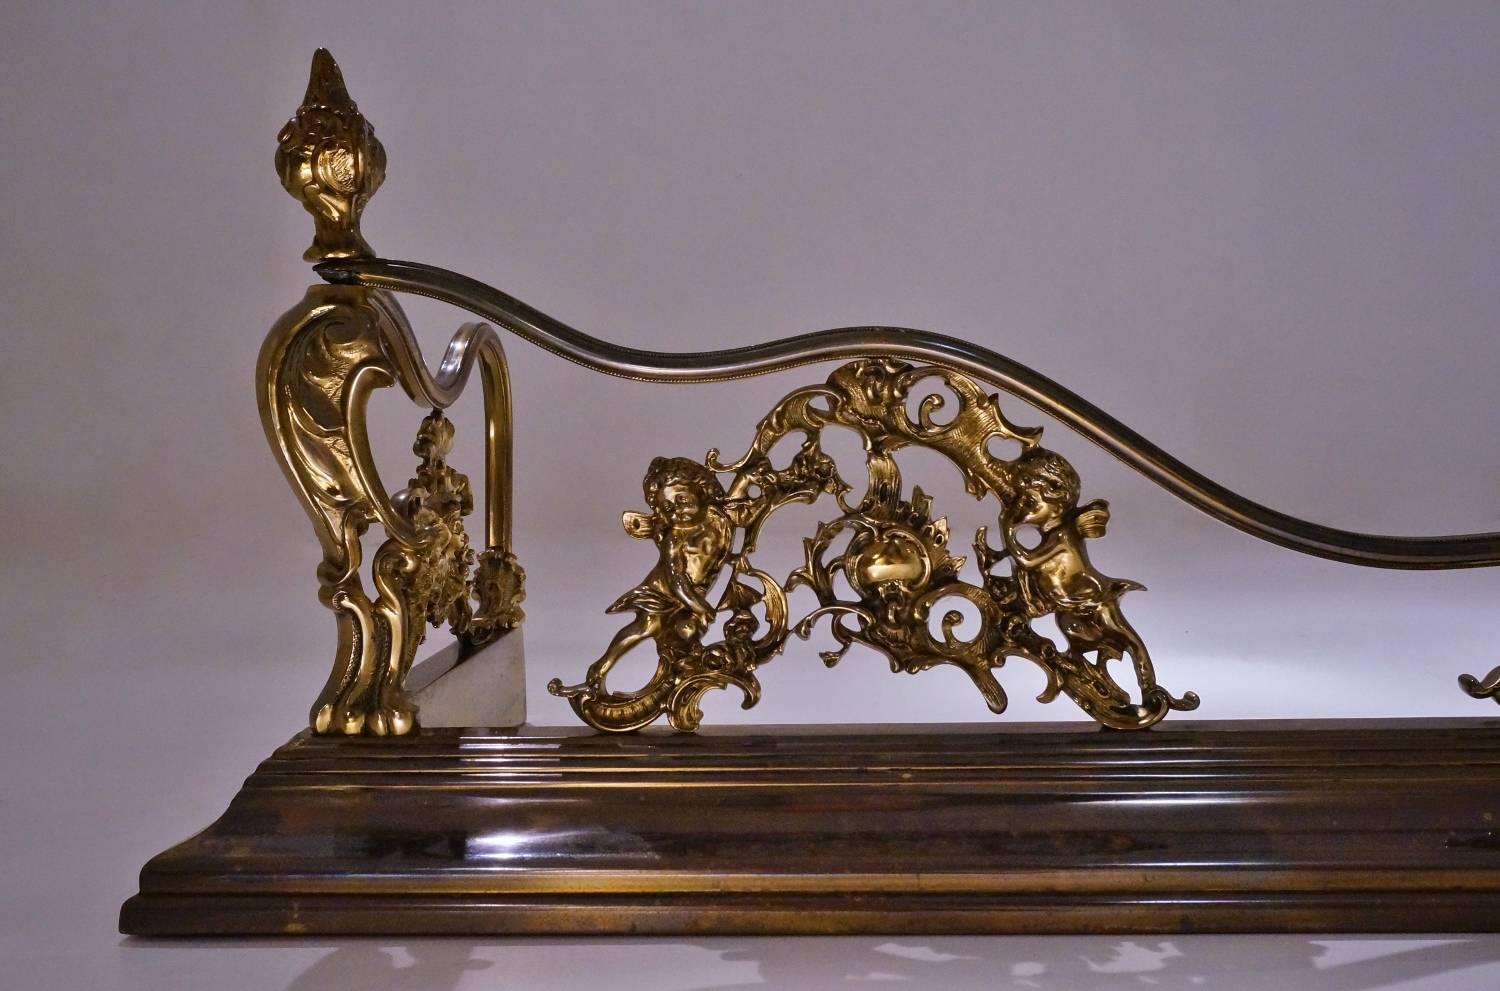 Brass fire fender Art Nouveau, circa 1900s, French.

Thoroughly cleaned respecting the original patina.

This quality cast solid brass fire fender is decorative with its undulating curves and design elements from the earlier baroque period. In